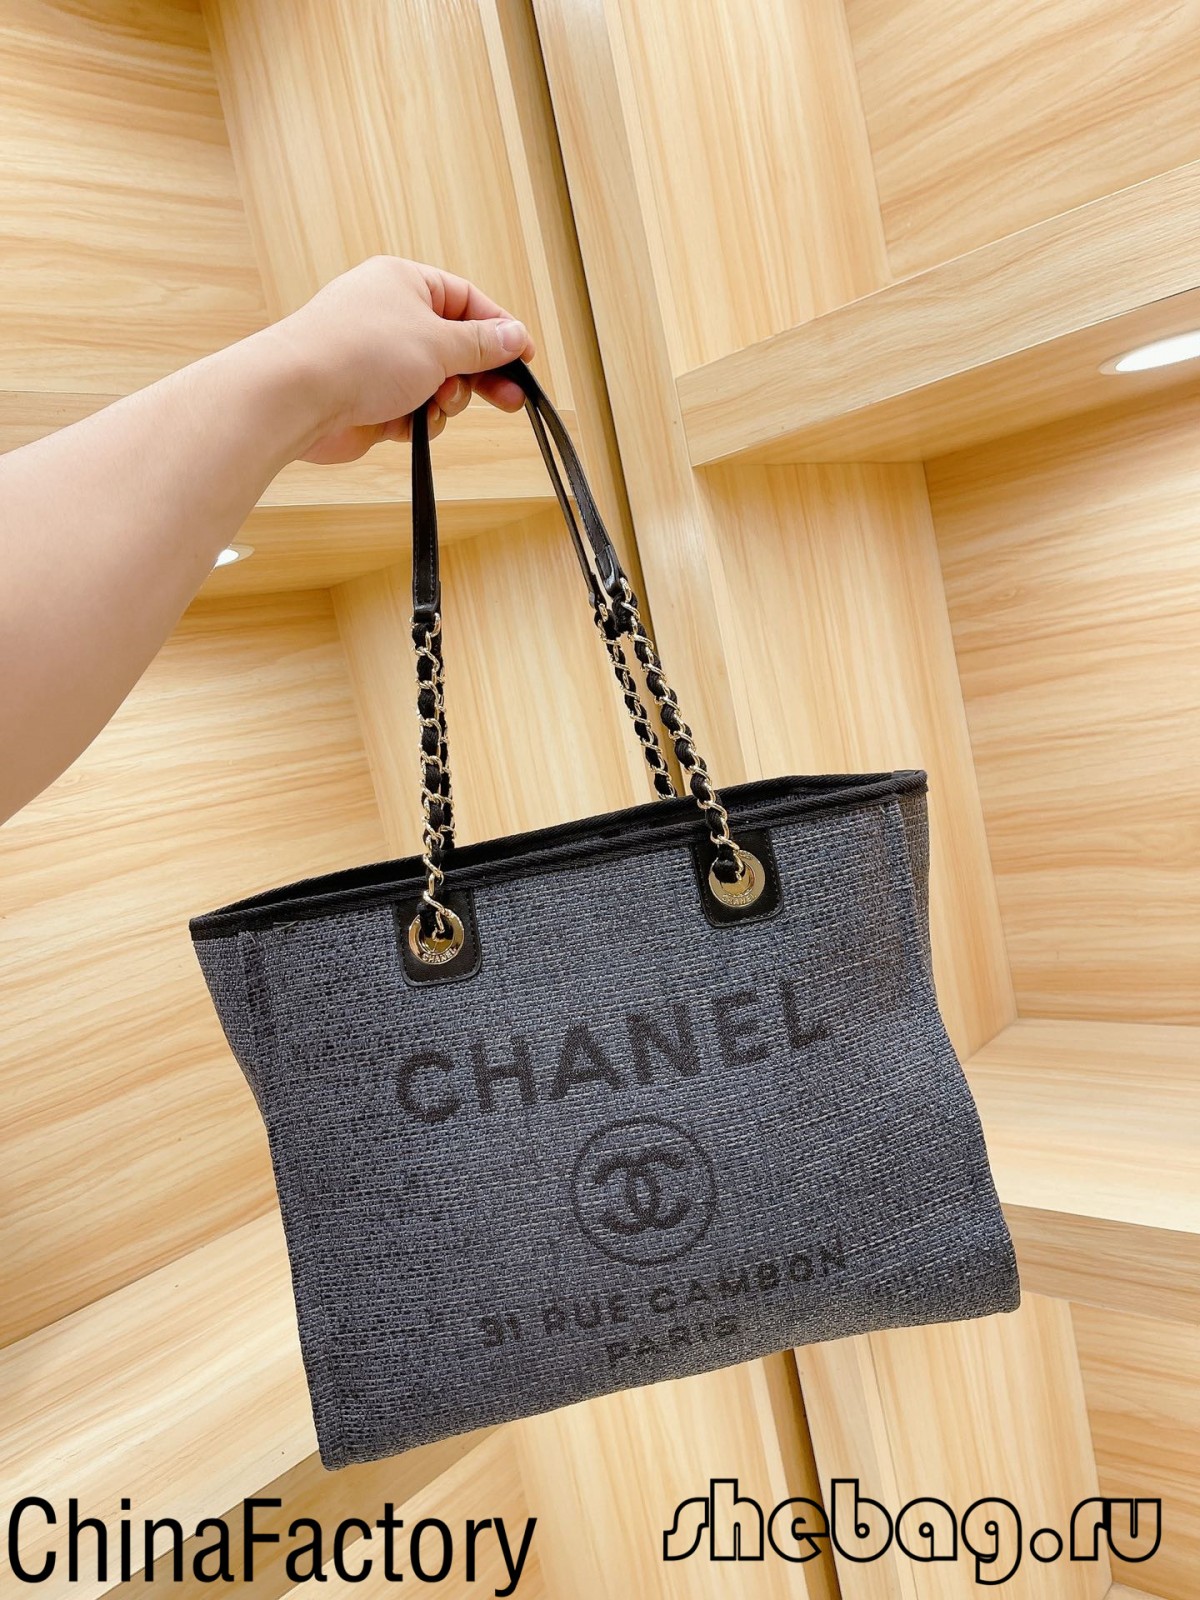 Chanel Deauville Canvas Tote Bag Replica Thok seller Repference (2022 Hottest)-Best Quality Fake Louis Vuitton Bag آن لائن اسٽور، Replica designer bag ru